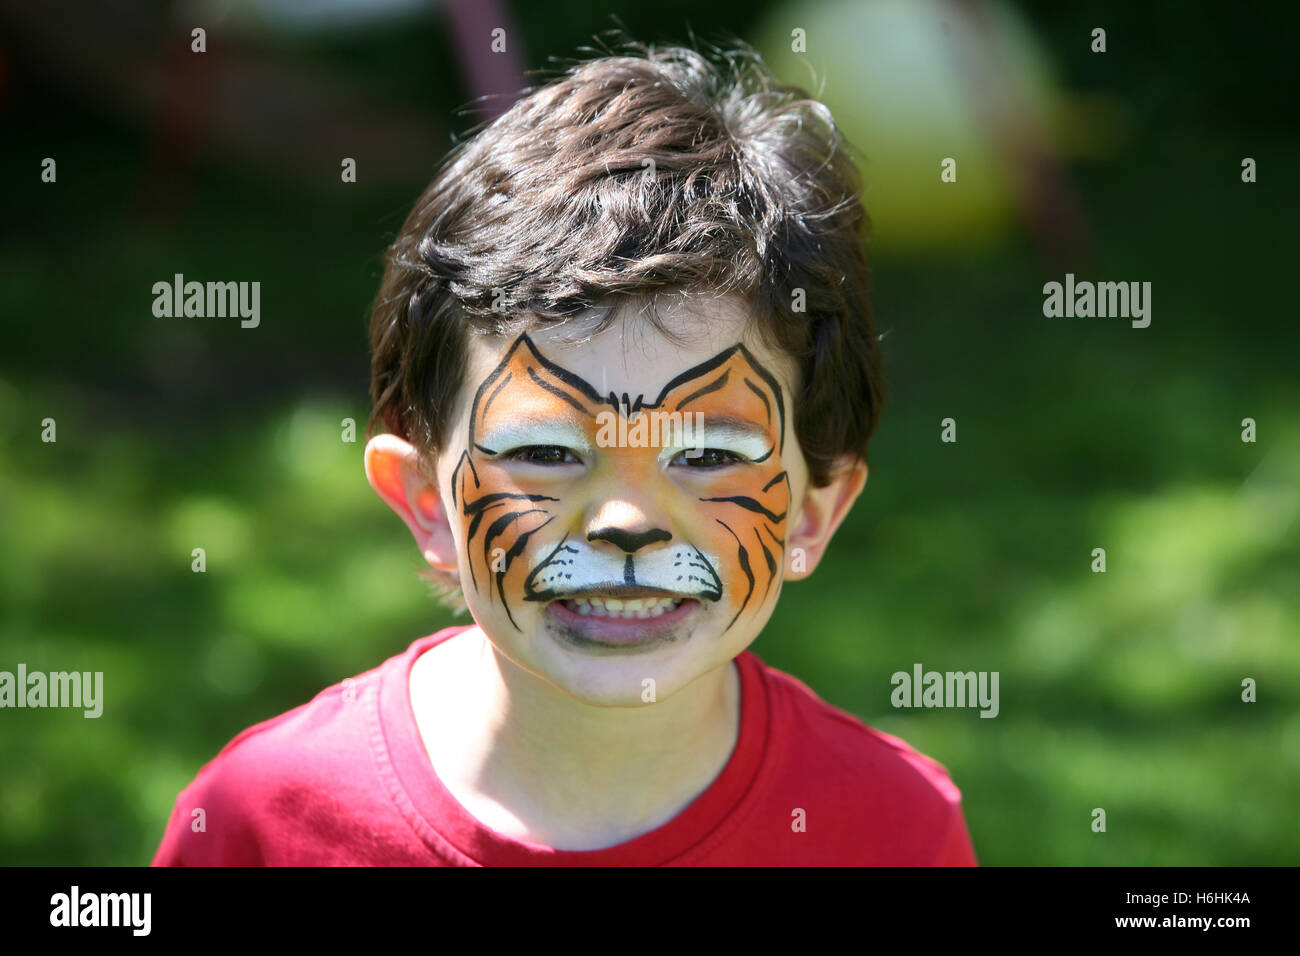 Young boy with face painted like a tiger Stock Photo